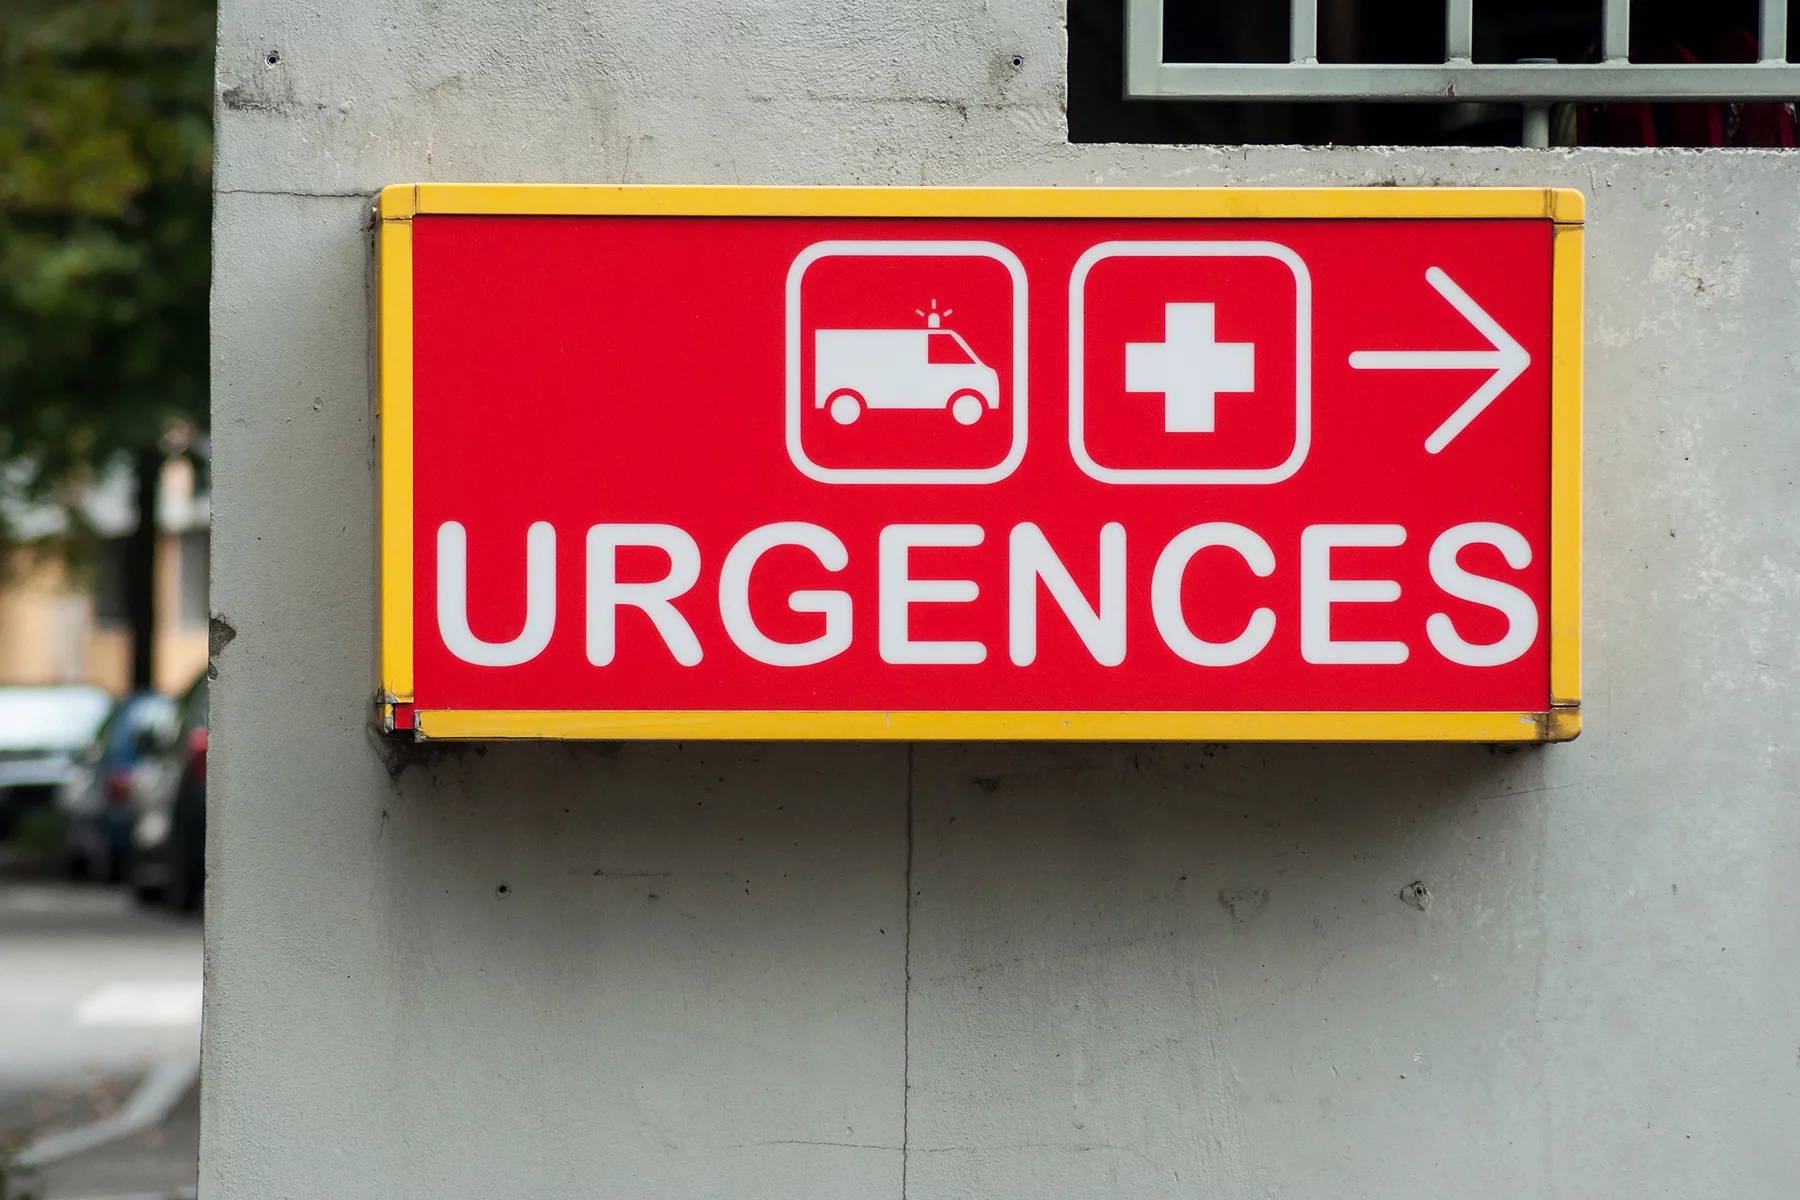 A bright red emergency room sign in France on the side of a concrete building